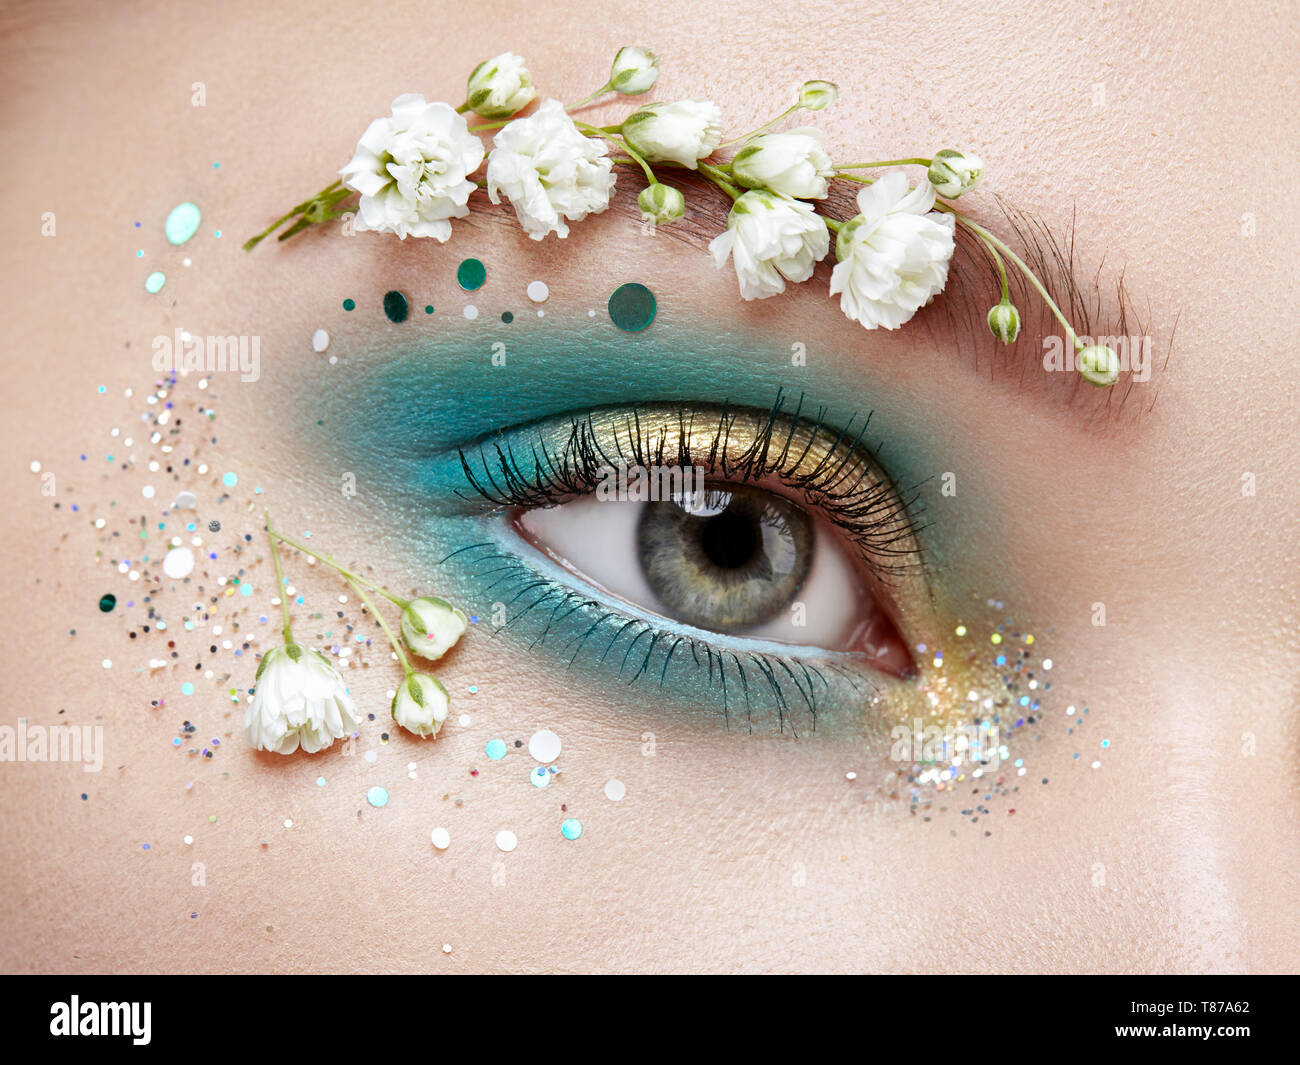 Scheur het winkelcentrum een miljard Eye makeup woman with a flowers. Spring makeup. Beauty fashion. Eyelashes.  Cosmetic Eyeshadow. Make-up detail. Creative woman floral make-up. White su  Stock Photo - Alamy